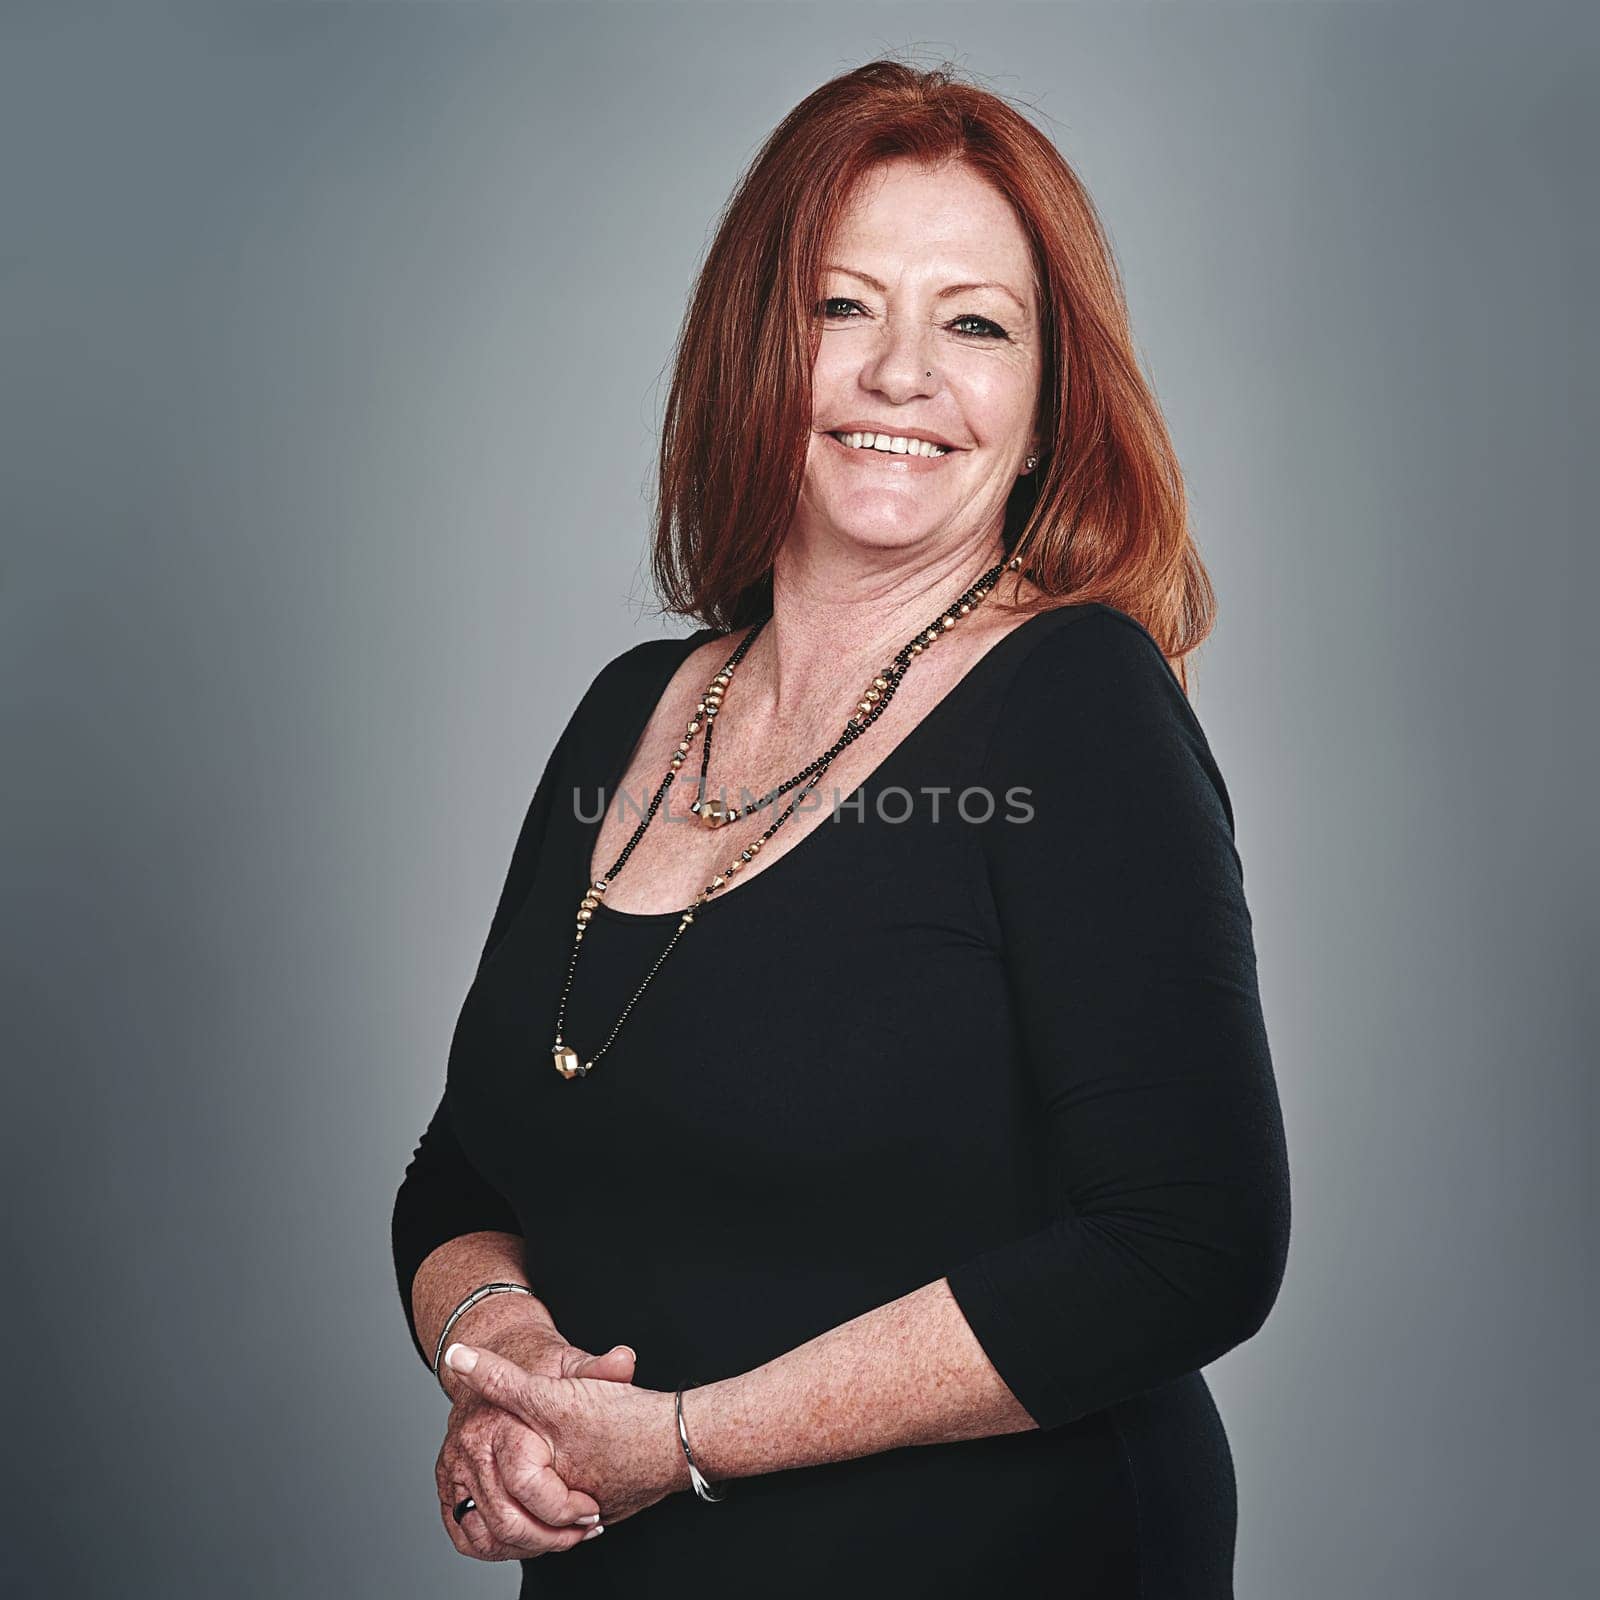 Passionate about personal and professional improvement. Studio portrait of a happy mature businesswoman posing against a grey background. by YuriArcurs